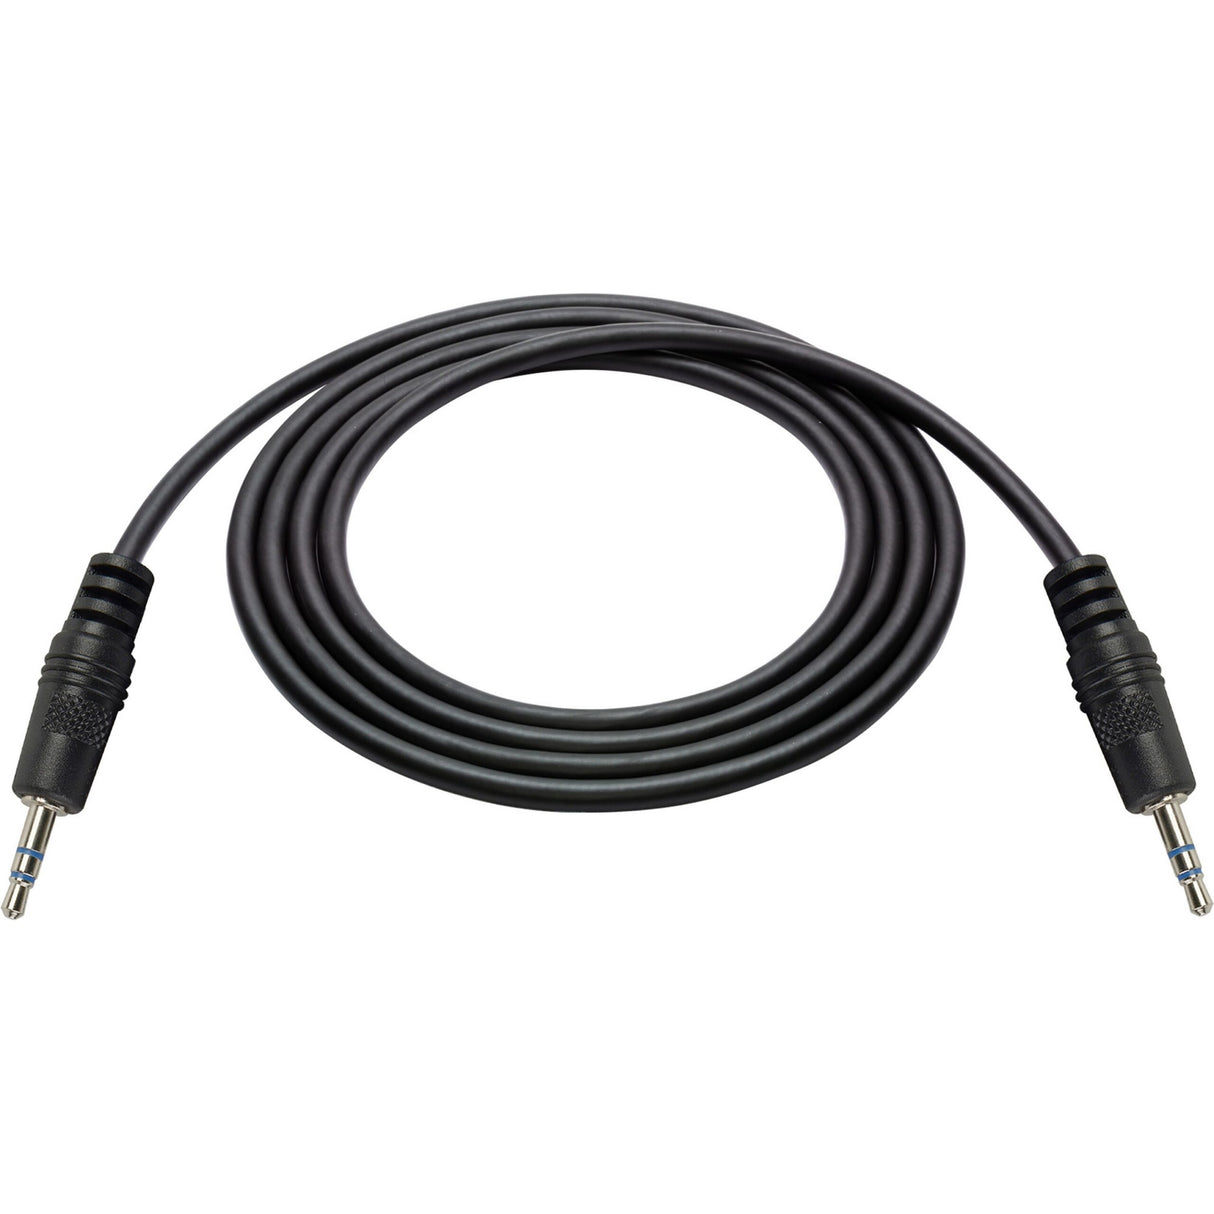 Connectronics Stereo Mini Male to Stereo Mini Male Cable, 6 Foot